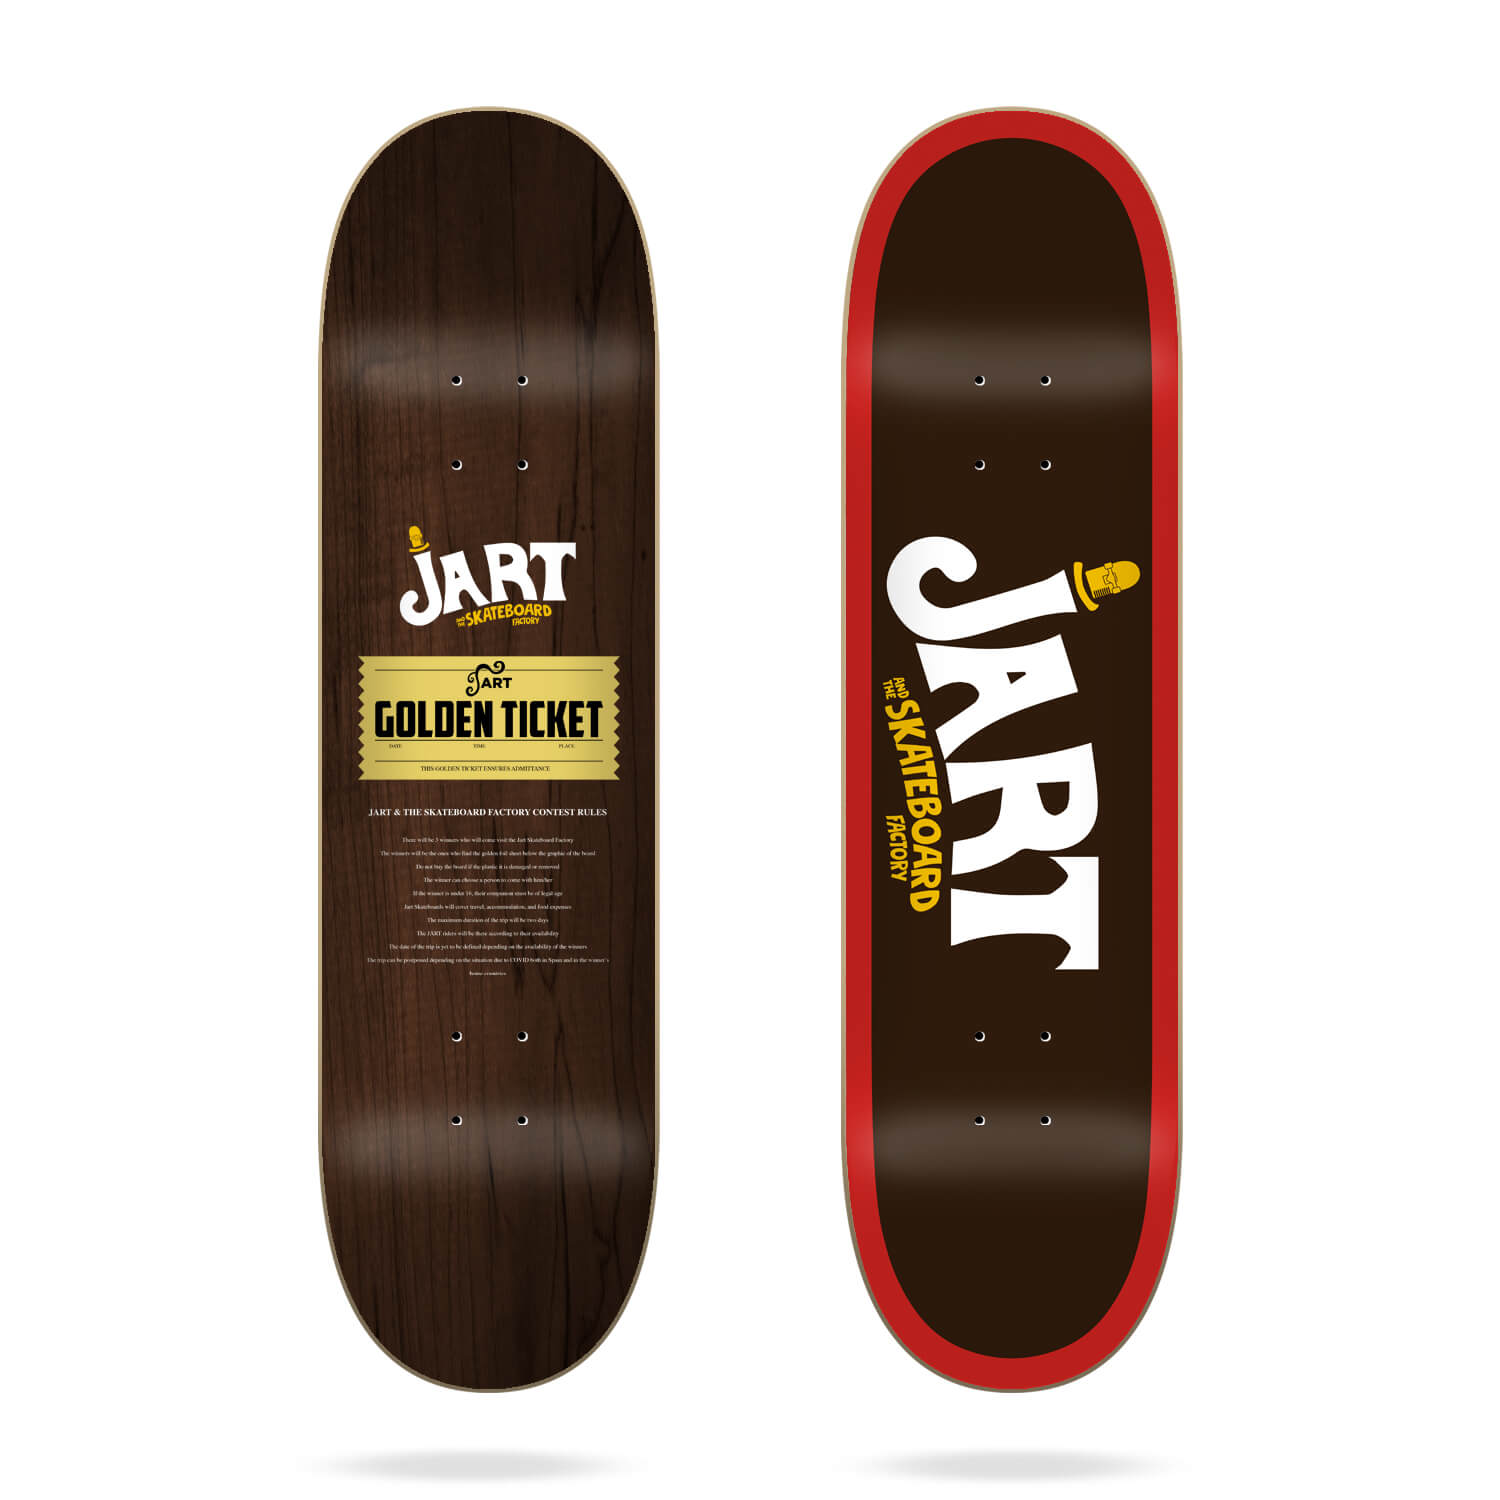 Jart And The Skateboard Factory 8.125" deck